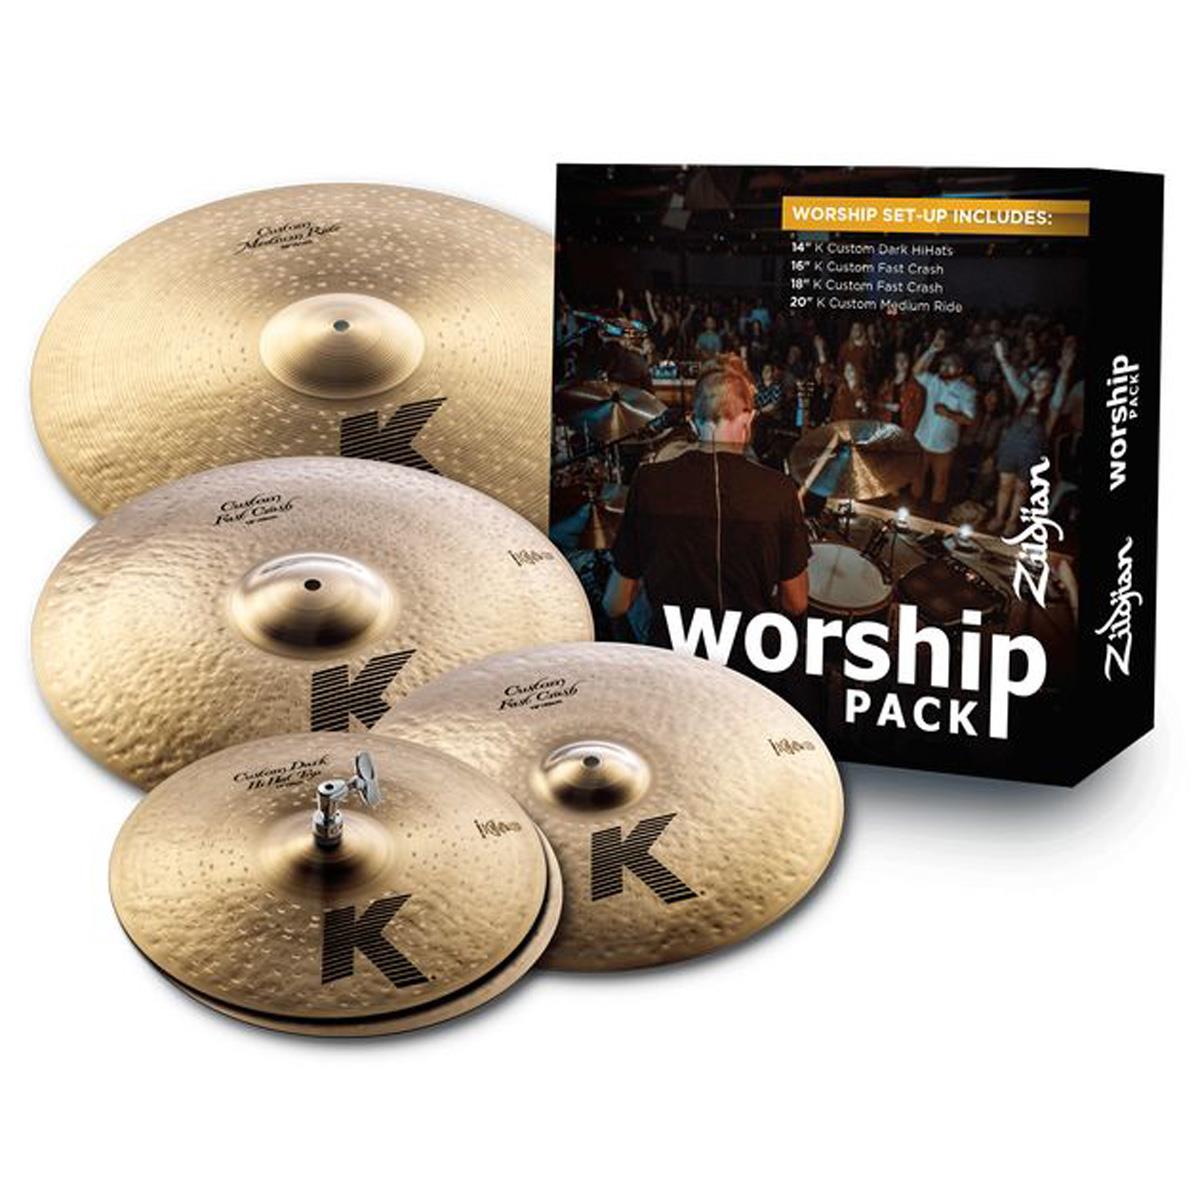 Zildjian Worship K Custom Cymbal Pack Lay the foundation of your worship team with the Zildjian Worship Pack. This warm sounding collection features the innovative K Custom Cymbals which are both powerful and vibrant, yet dark and gentle. The pack includes:• 14" K Custom Dark Hi-Hats• 16" K Custom Fast Crash• 18" K Custom Fast Crash• 20" K Custom Medium RideEach cymbal was hand selected to give you the proper tones and warm sounds to perfectly capture the spirit of Worship music and work in harmony with the vocals, guitars and keyboard. All Zildjian Cymbals are made in the USA.